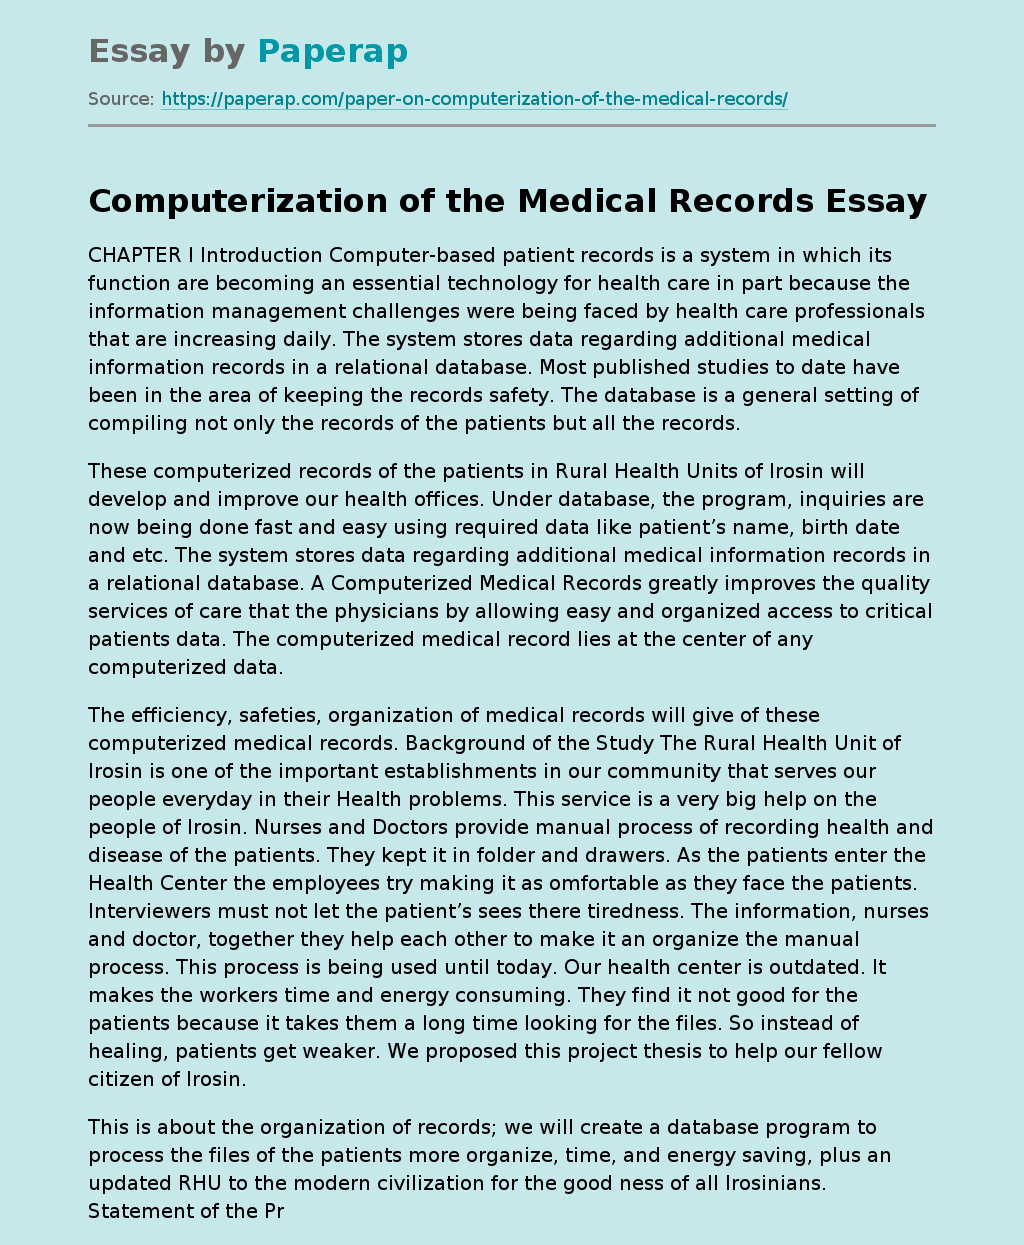 Computerization of the Medical Records